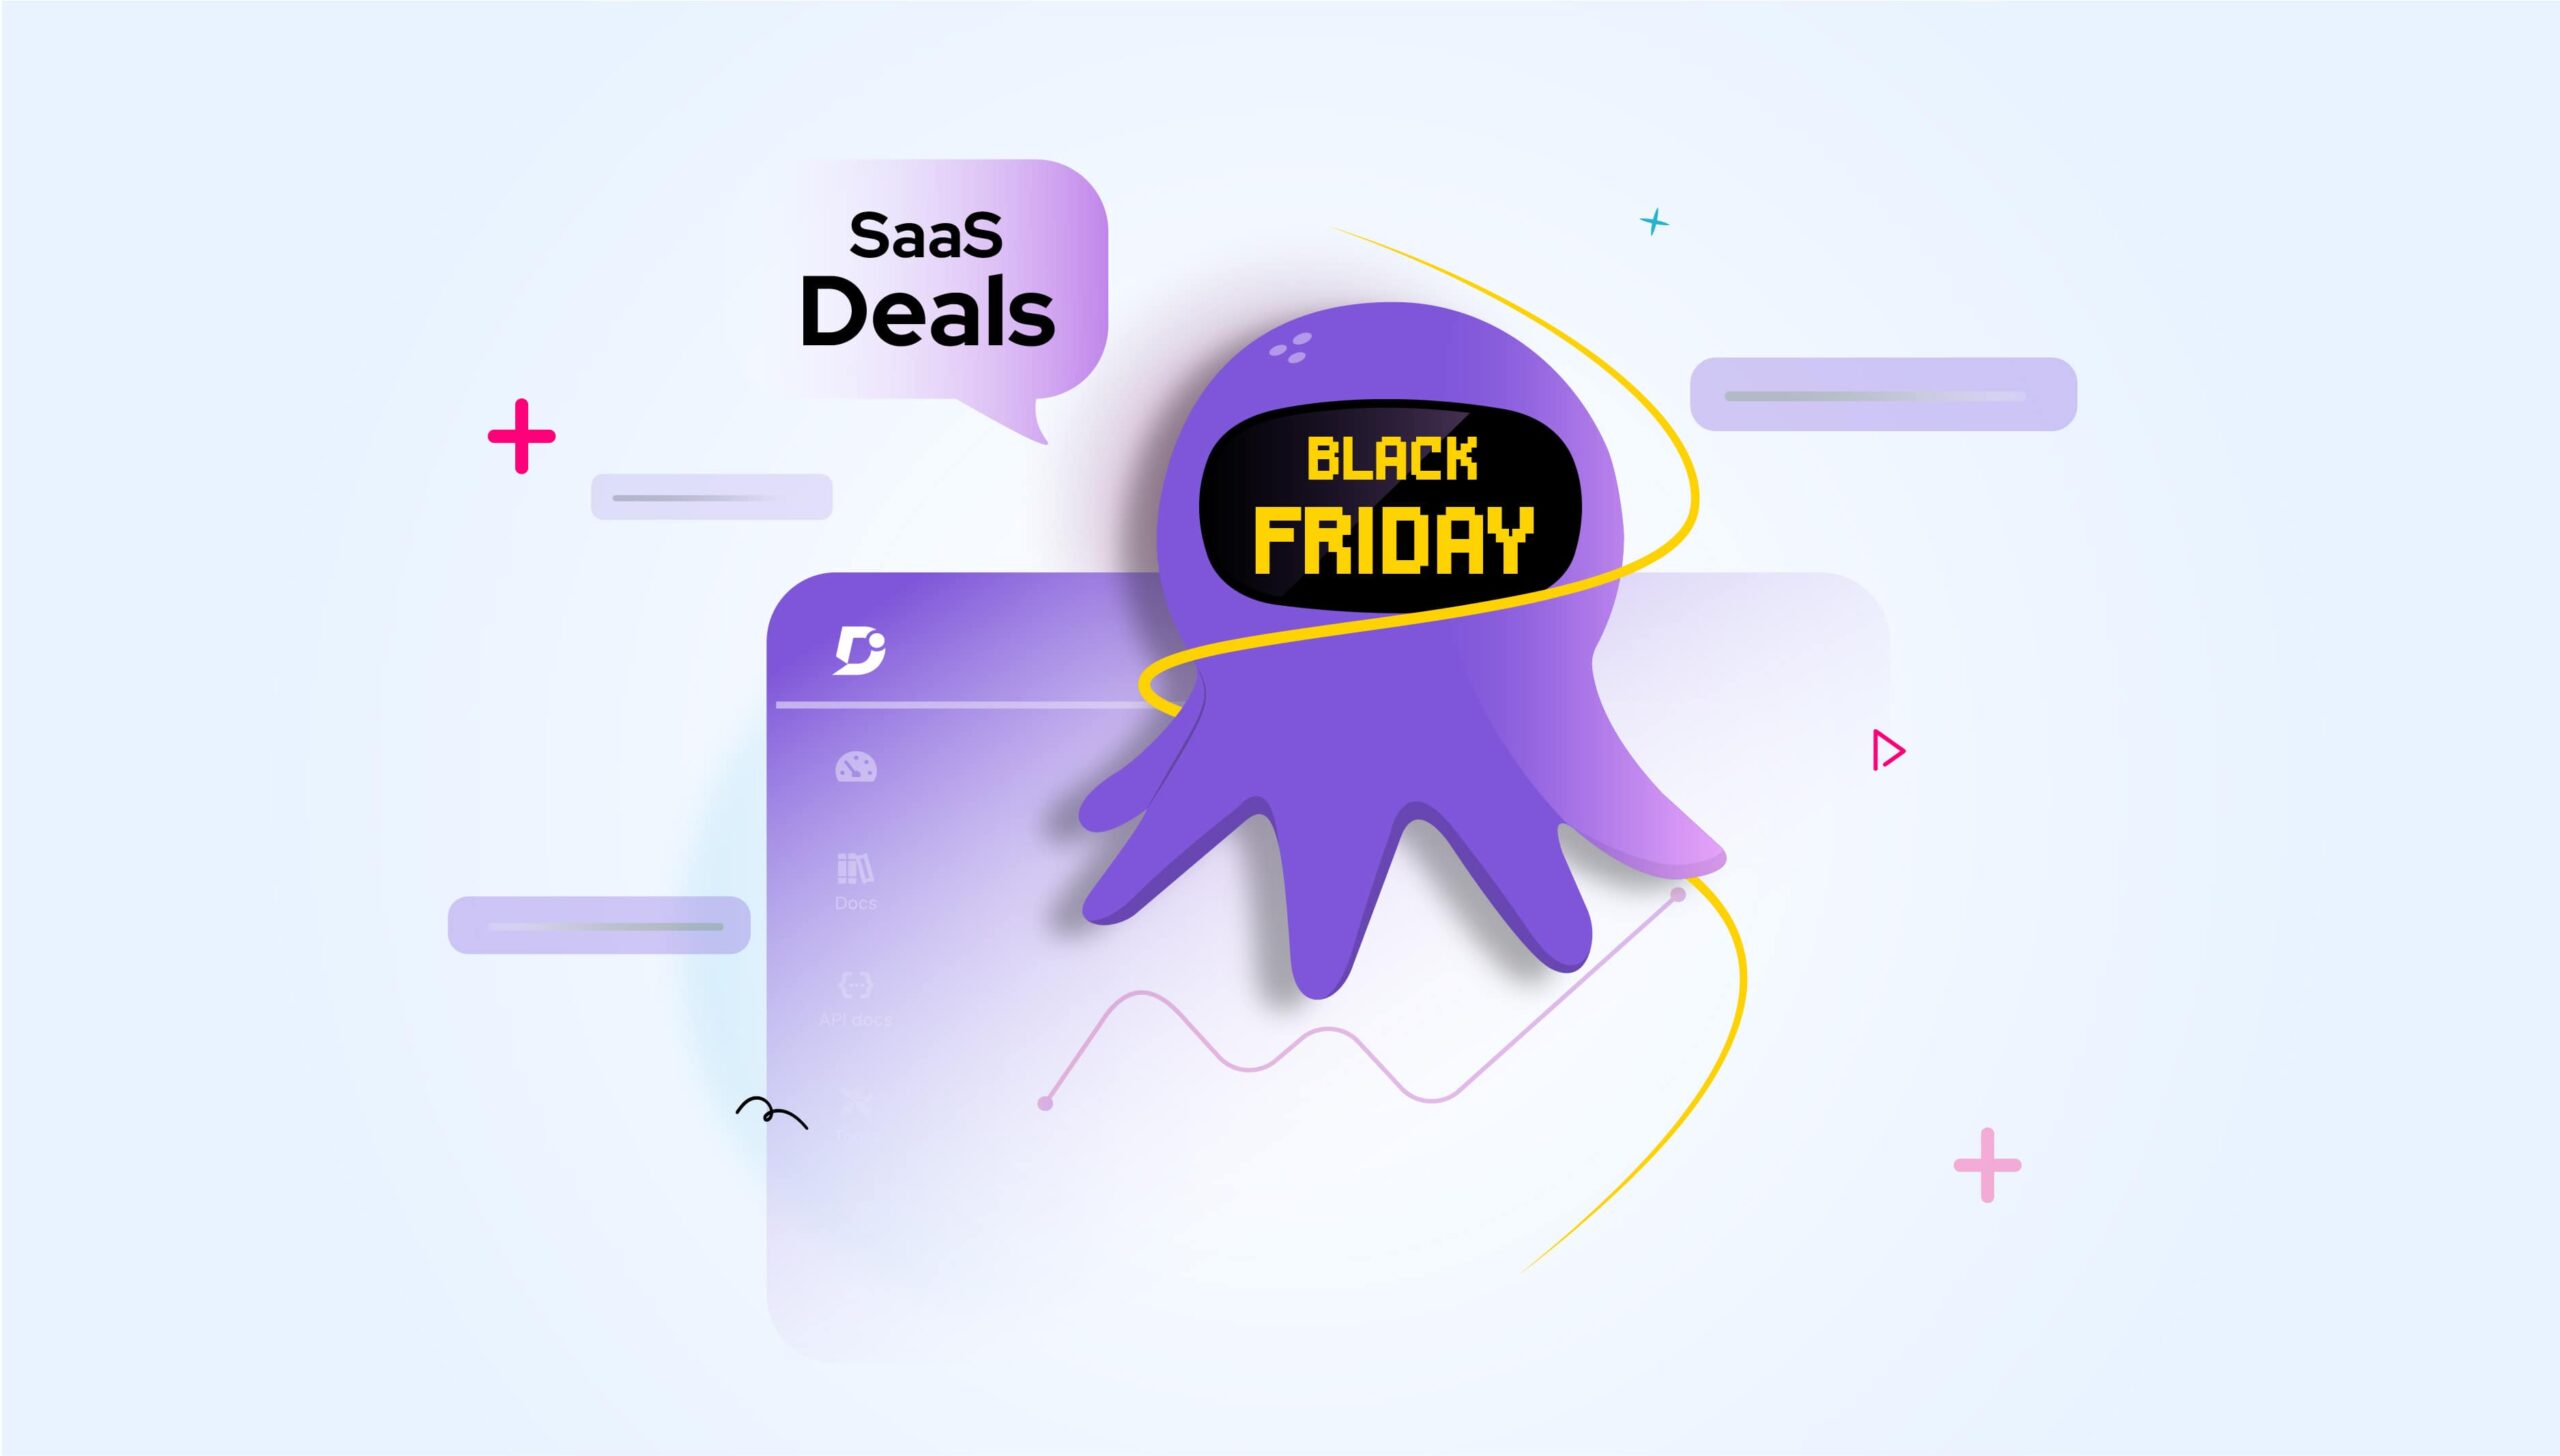 The Best Black Friday SaaS Deals in 2023